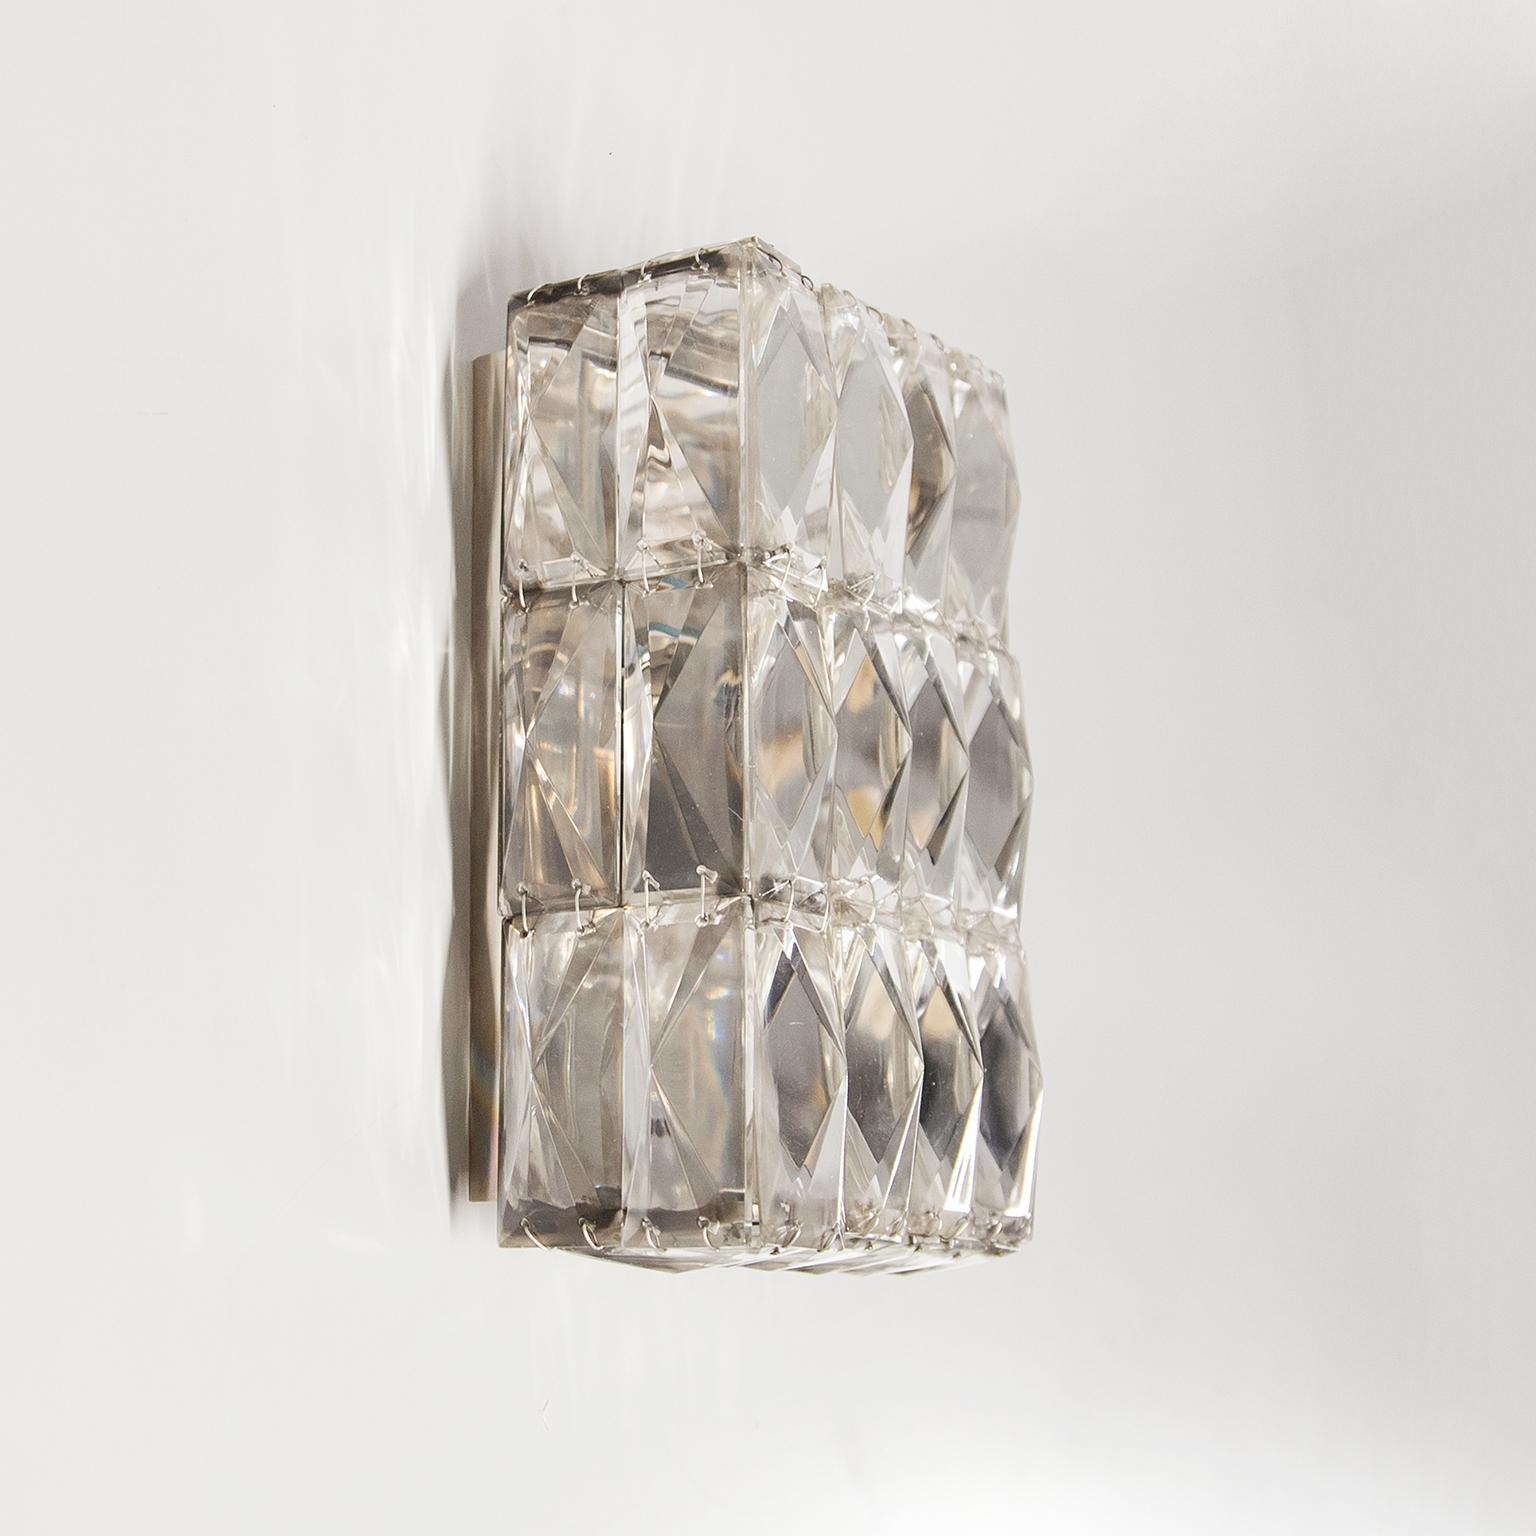 Pair of faceted crystal glass nickel-plated wall light or sconces, manufactured by Bakalowits Austria, circa 1950s, documented in the Bakalowits sales catalogue. The high quality and handmade light has a nickel-plated metal base with two E 14